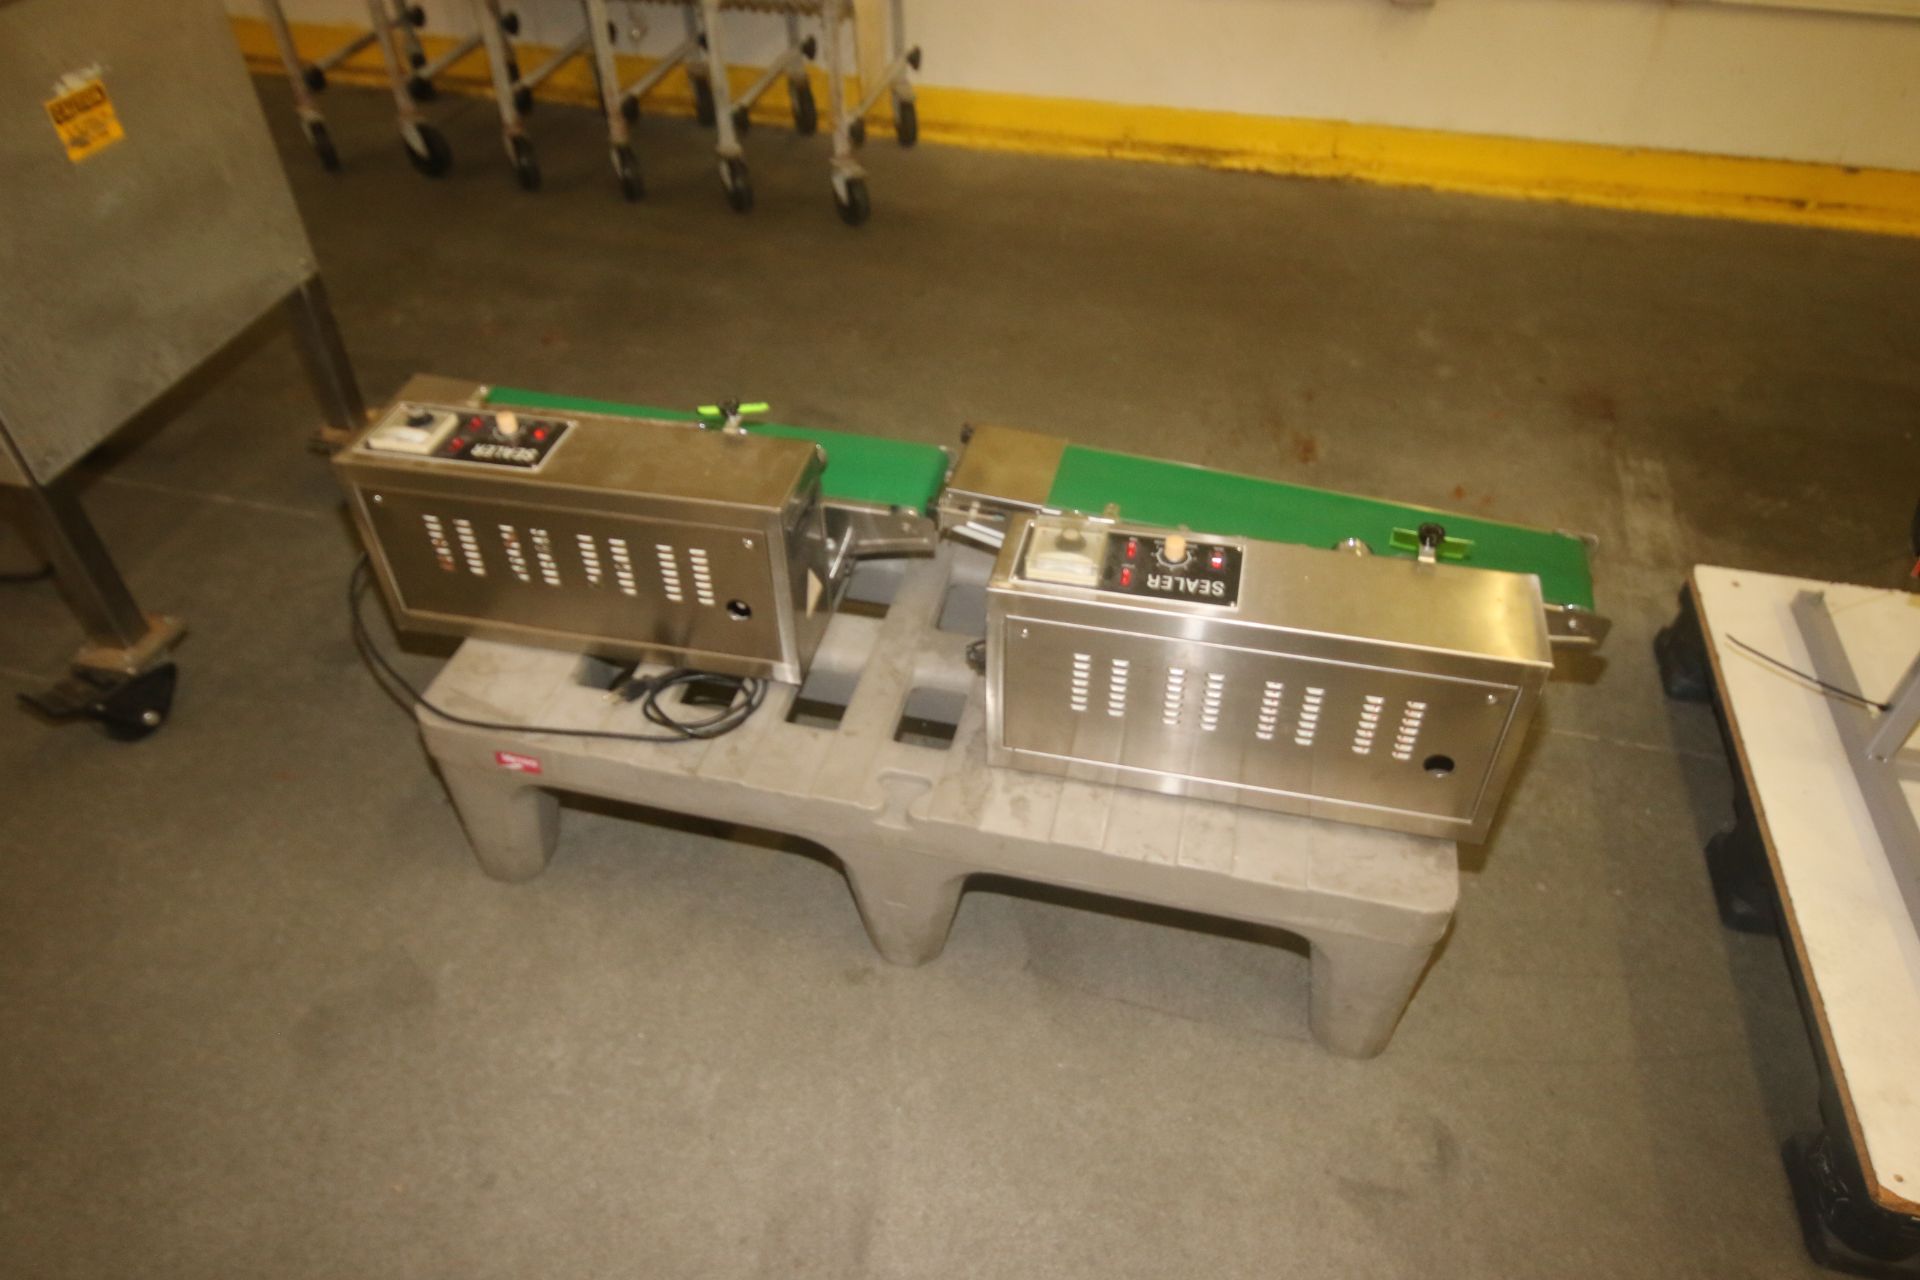 FR-900 Series Band Sealer, Capacity 0-12 m/Minute, with Aprox. 30" L x 5-1/4" W Belt, with Plastic - Image 5 of 5